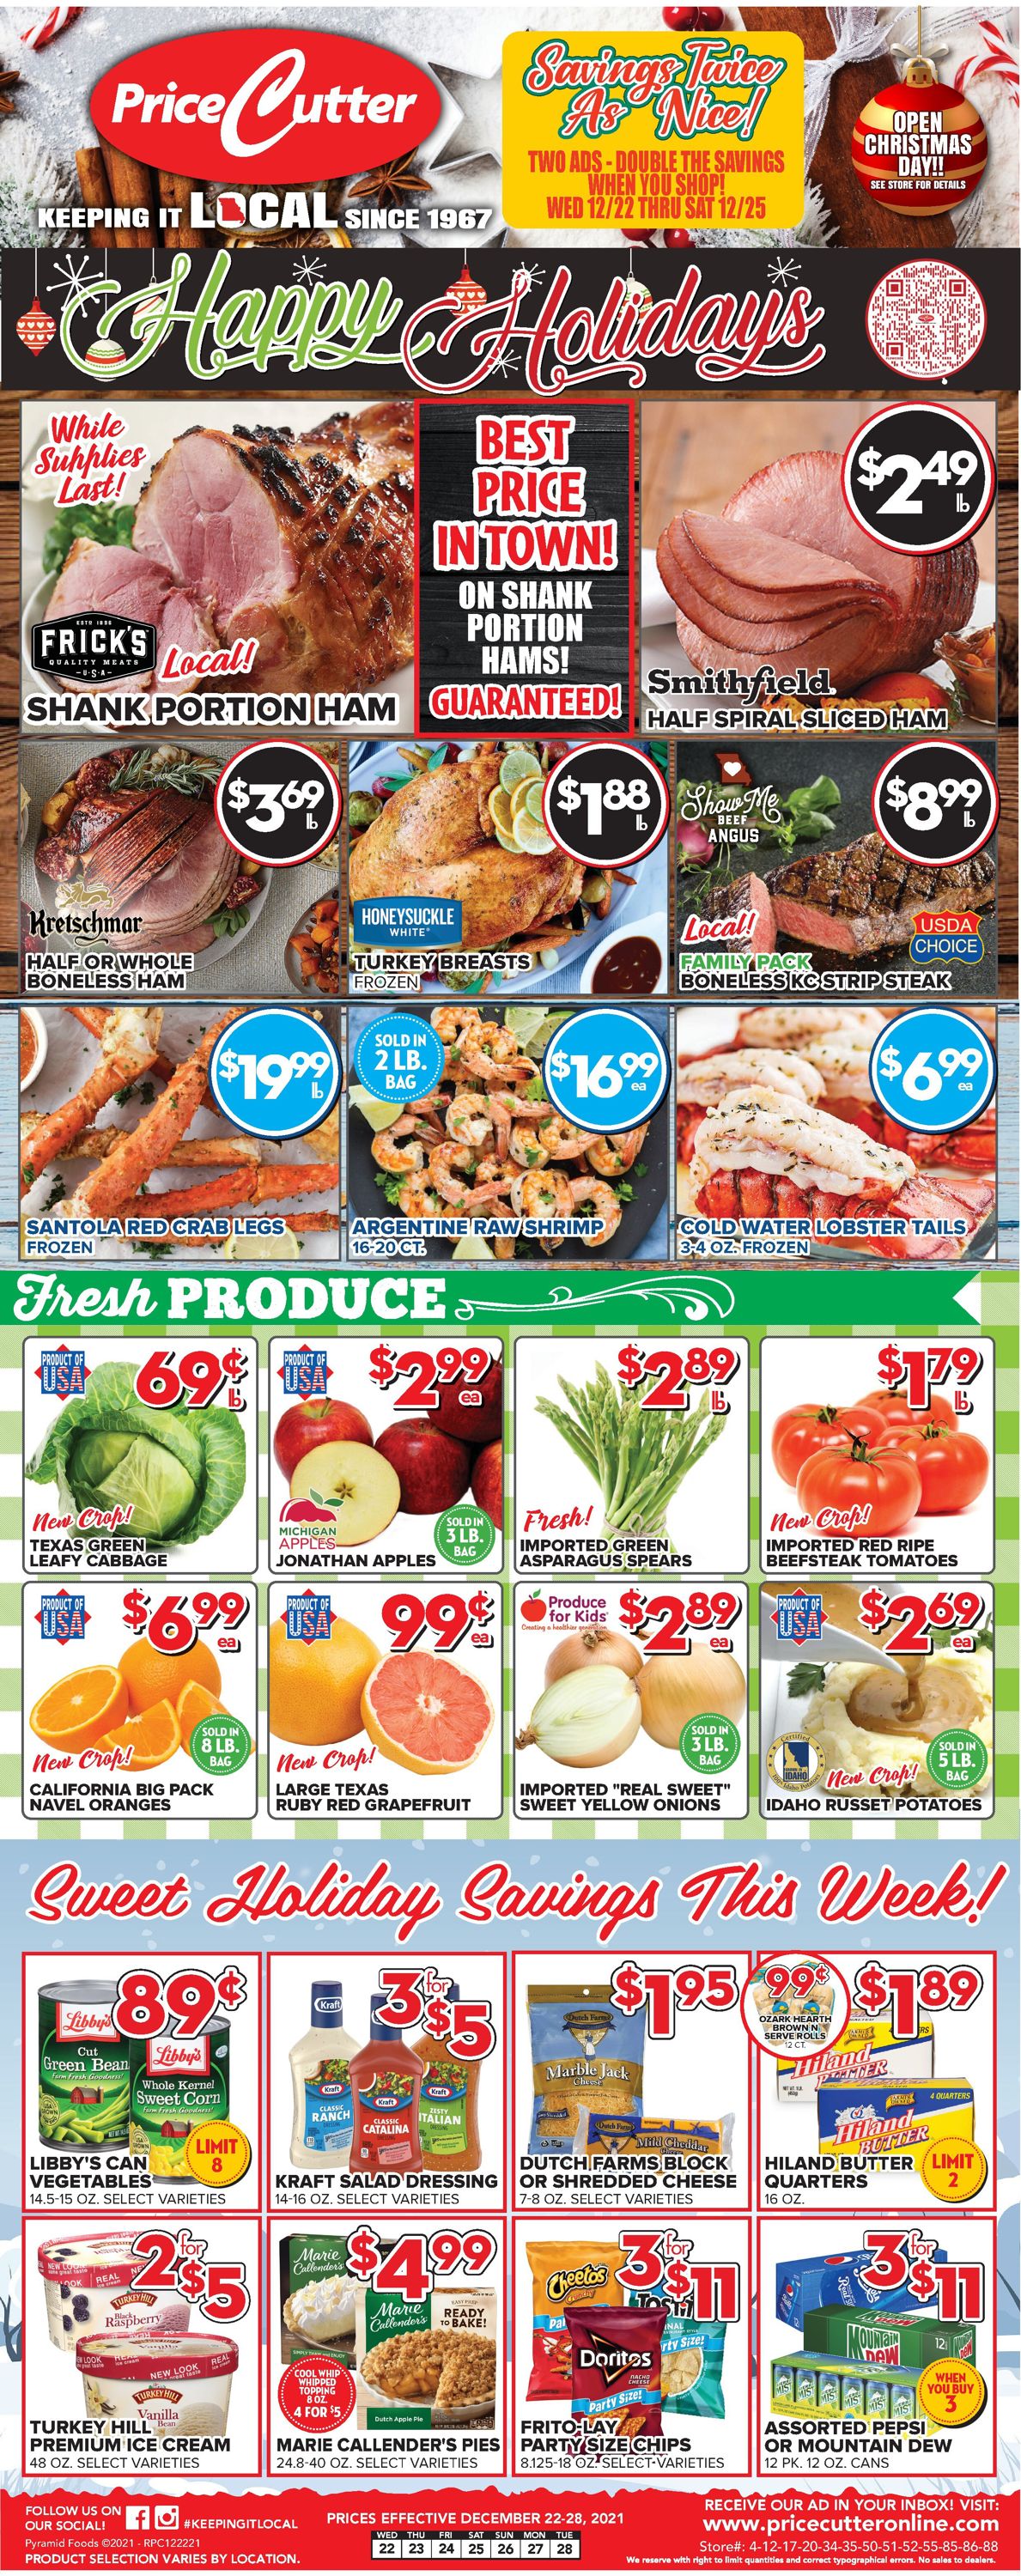 Price Cutter CHRISTMAS 2021 Weekly Ad Circular - valid 12/22-12/28/2021